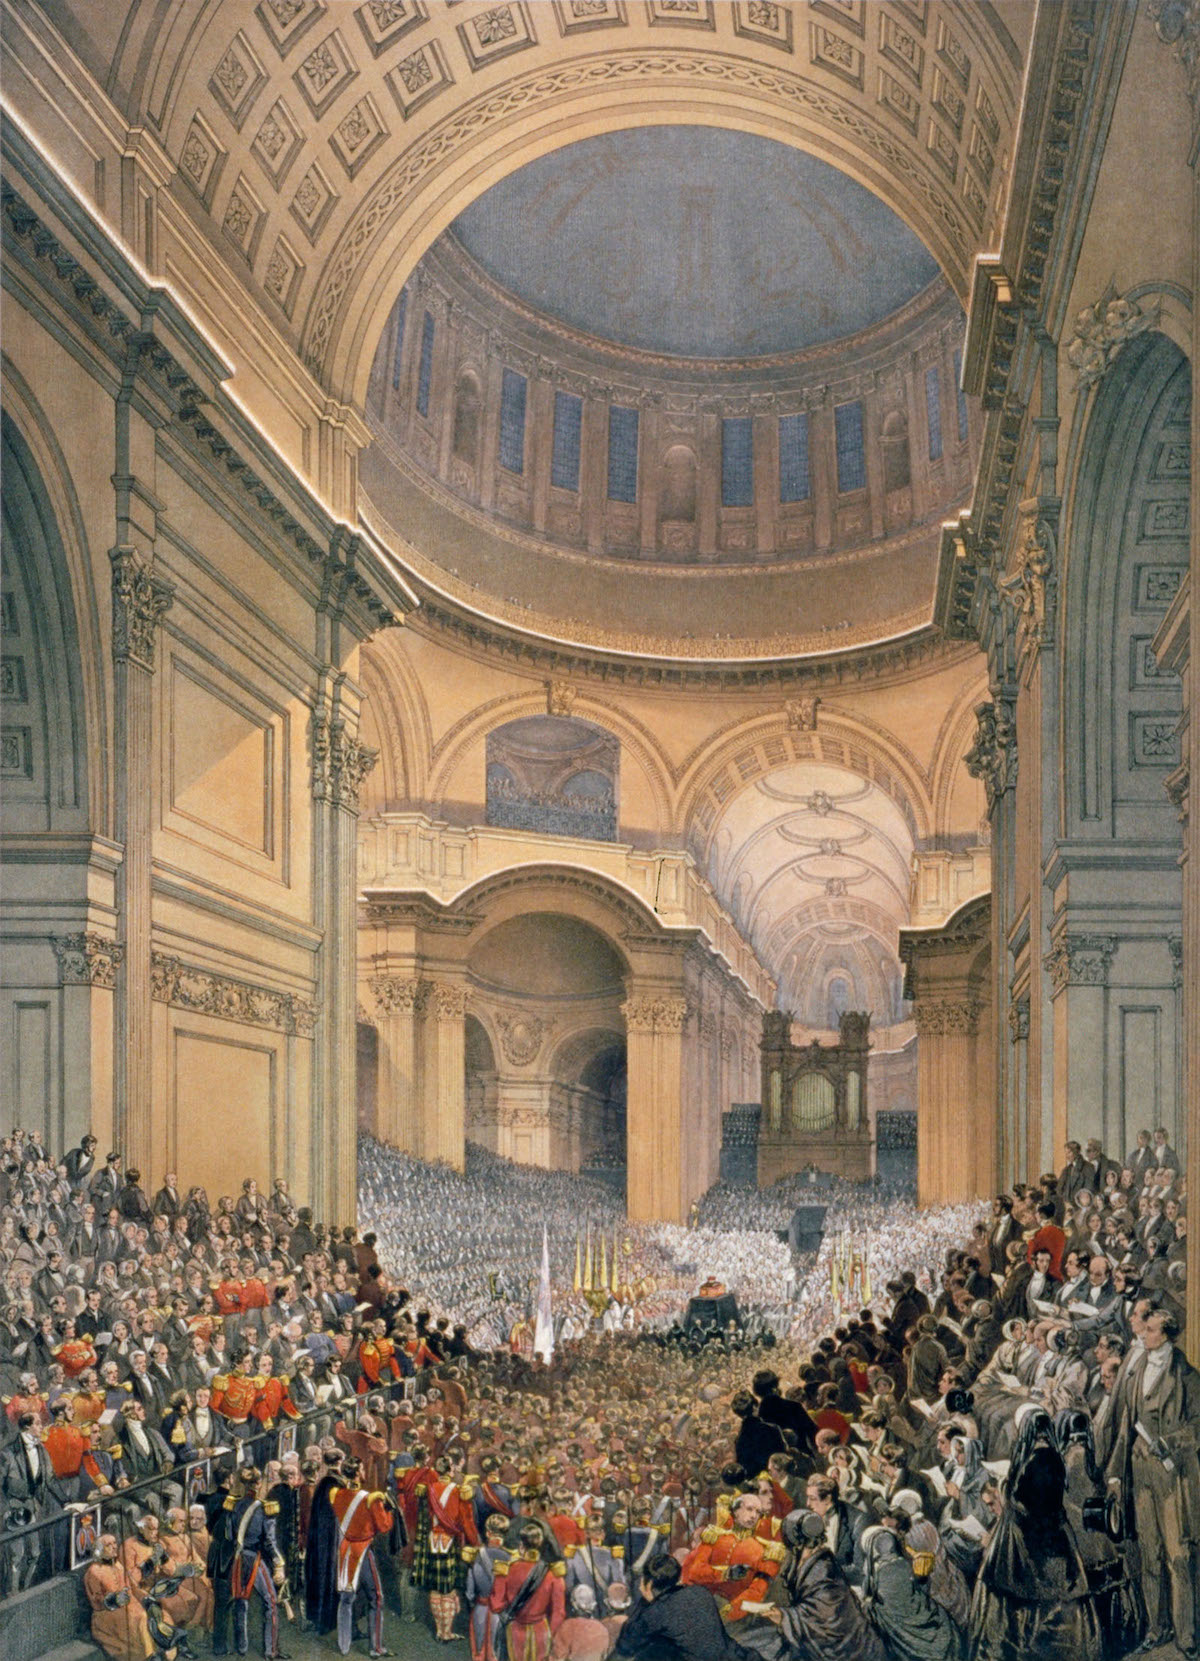 Interior of St Paul’s Cathedral during the funeral of the Duke of Wellington, 1852, by William Simpson. Heritage Image Partnership/Alamy Stock Photo.